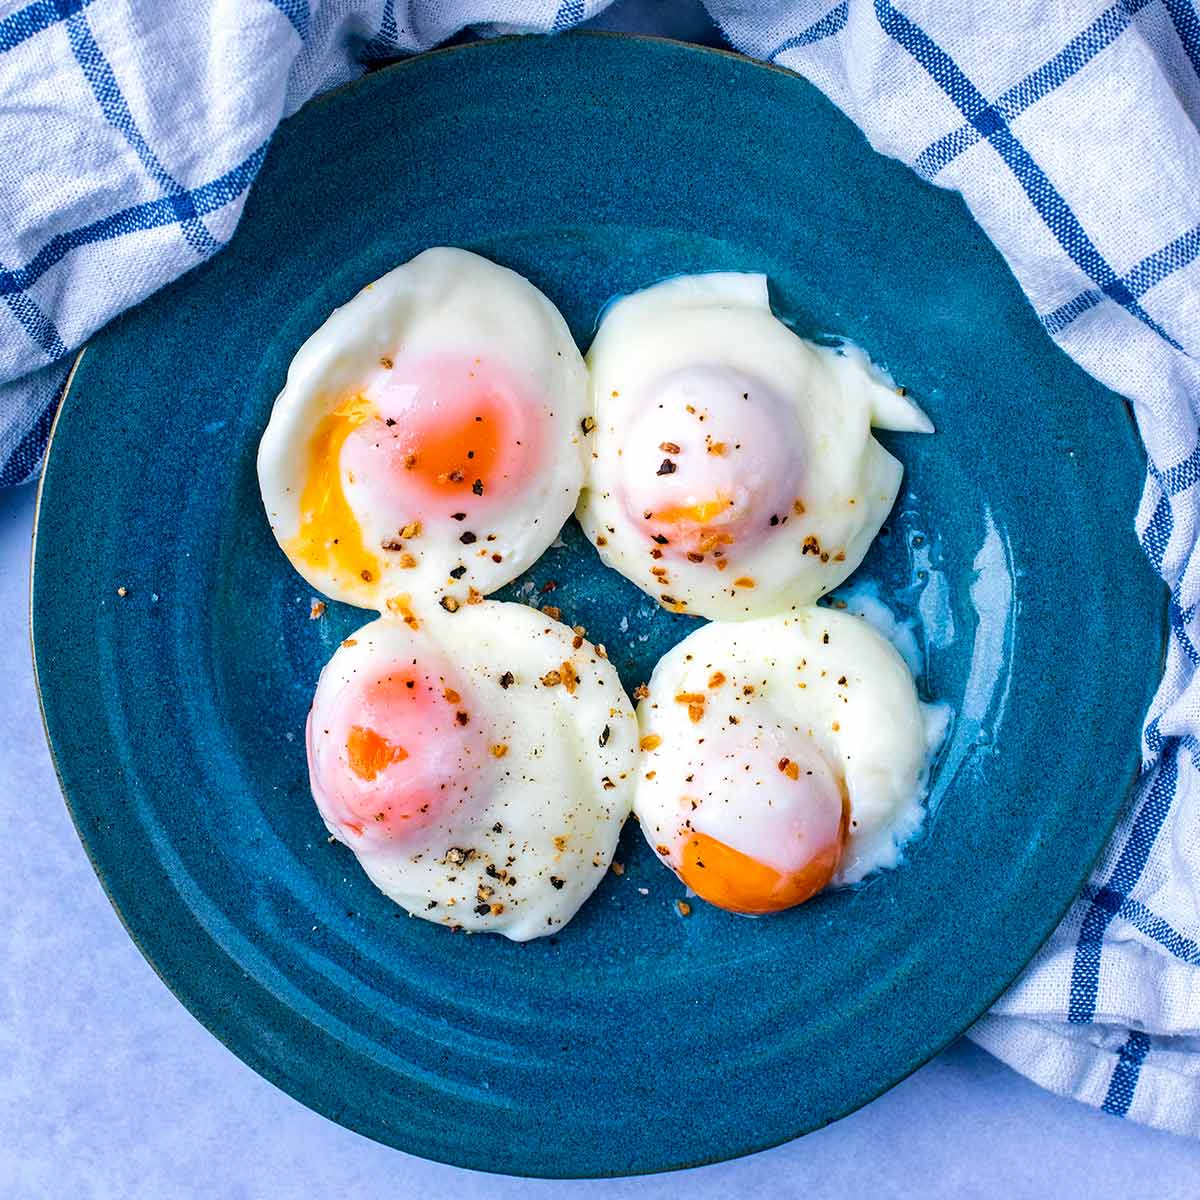 https://hungryhealthyhappy.com/wp-content/uploads/2021/11/Microwave-Poached-Eggs-featured.jpg